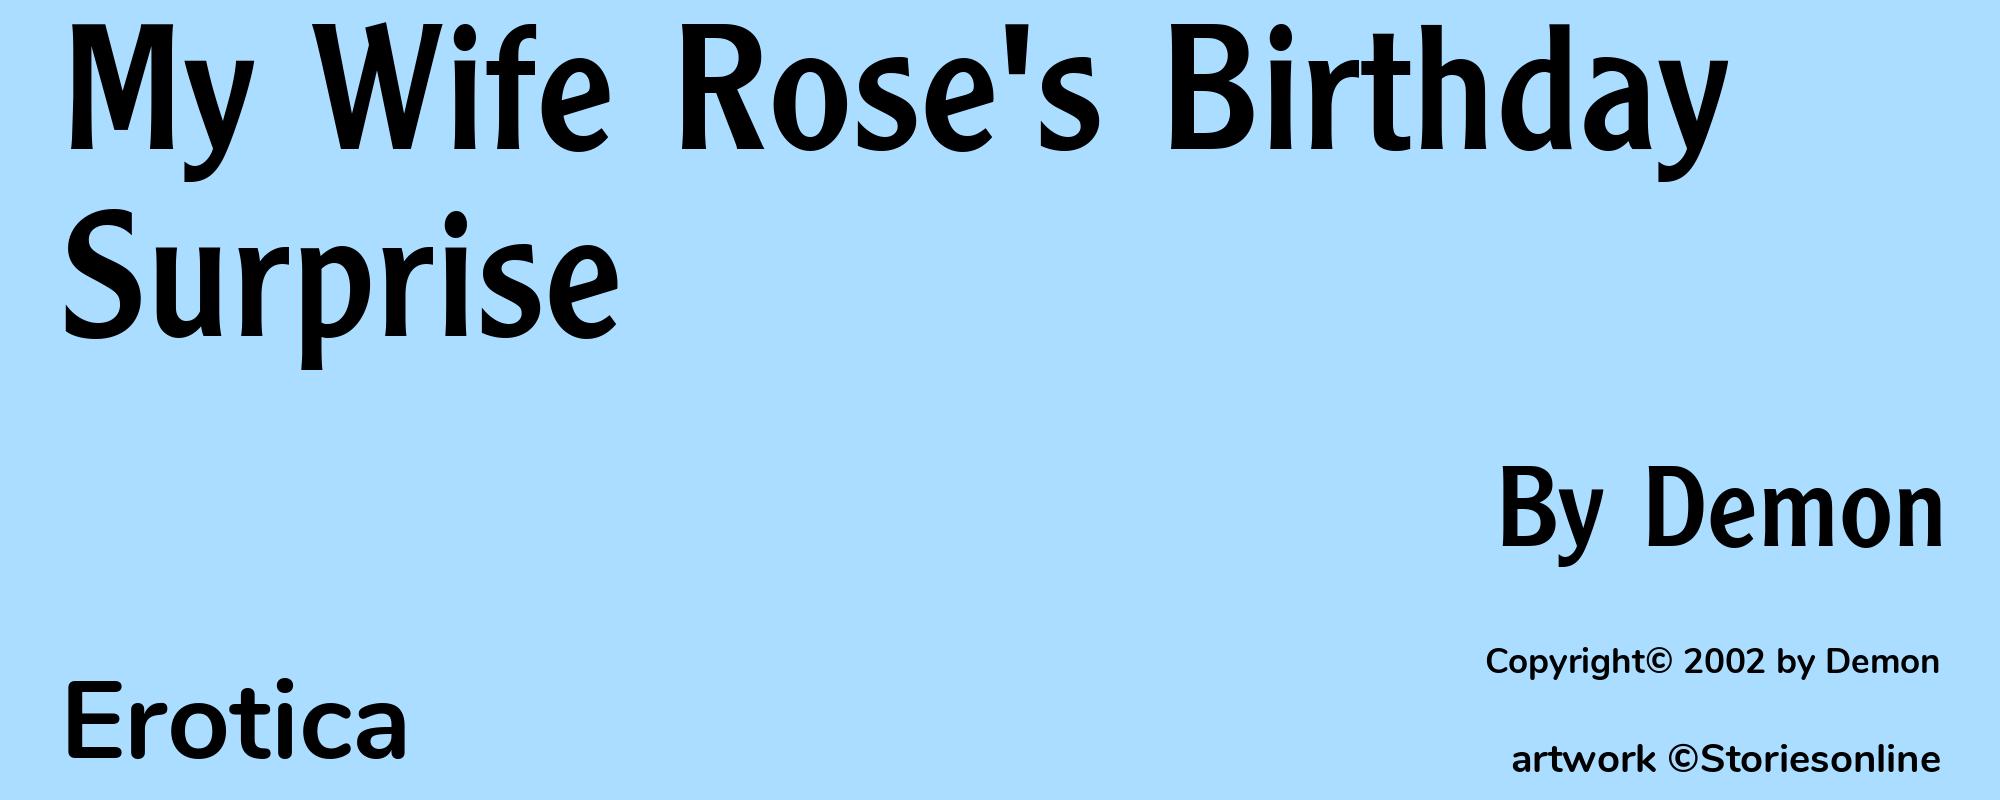 My Wife Rose's Birthday Surprise - Cover